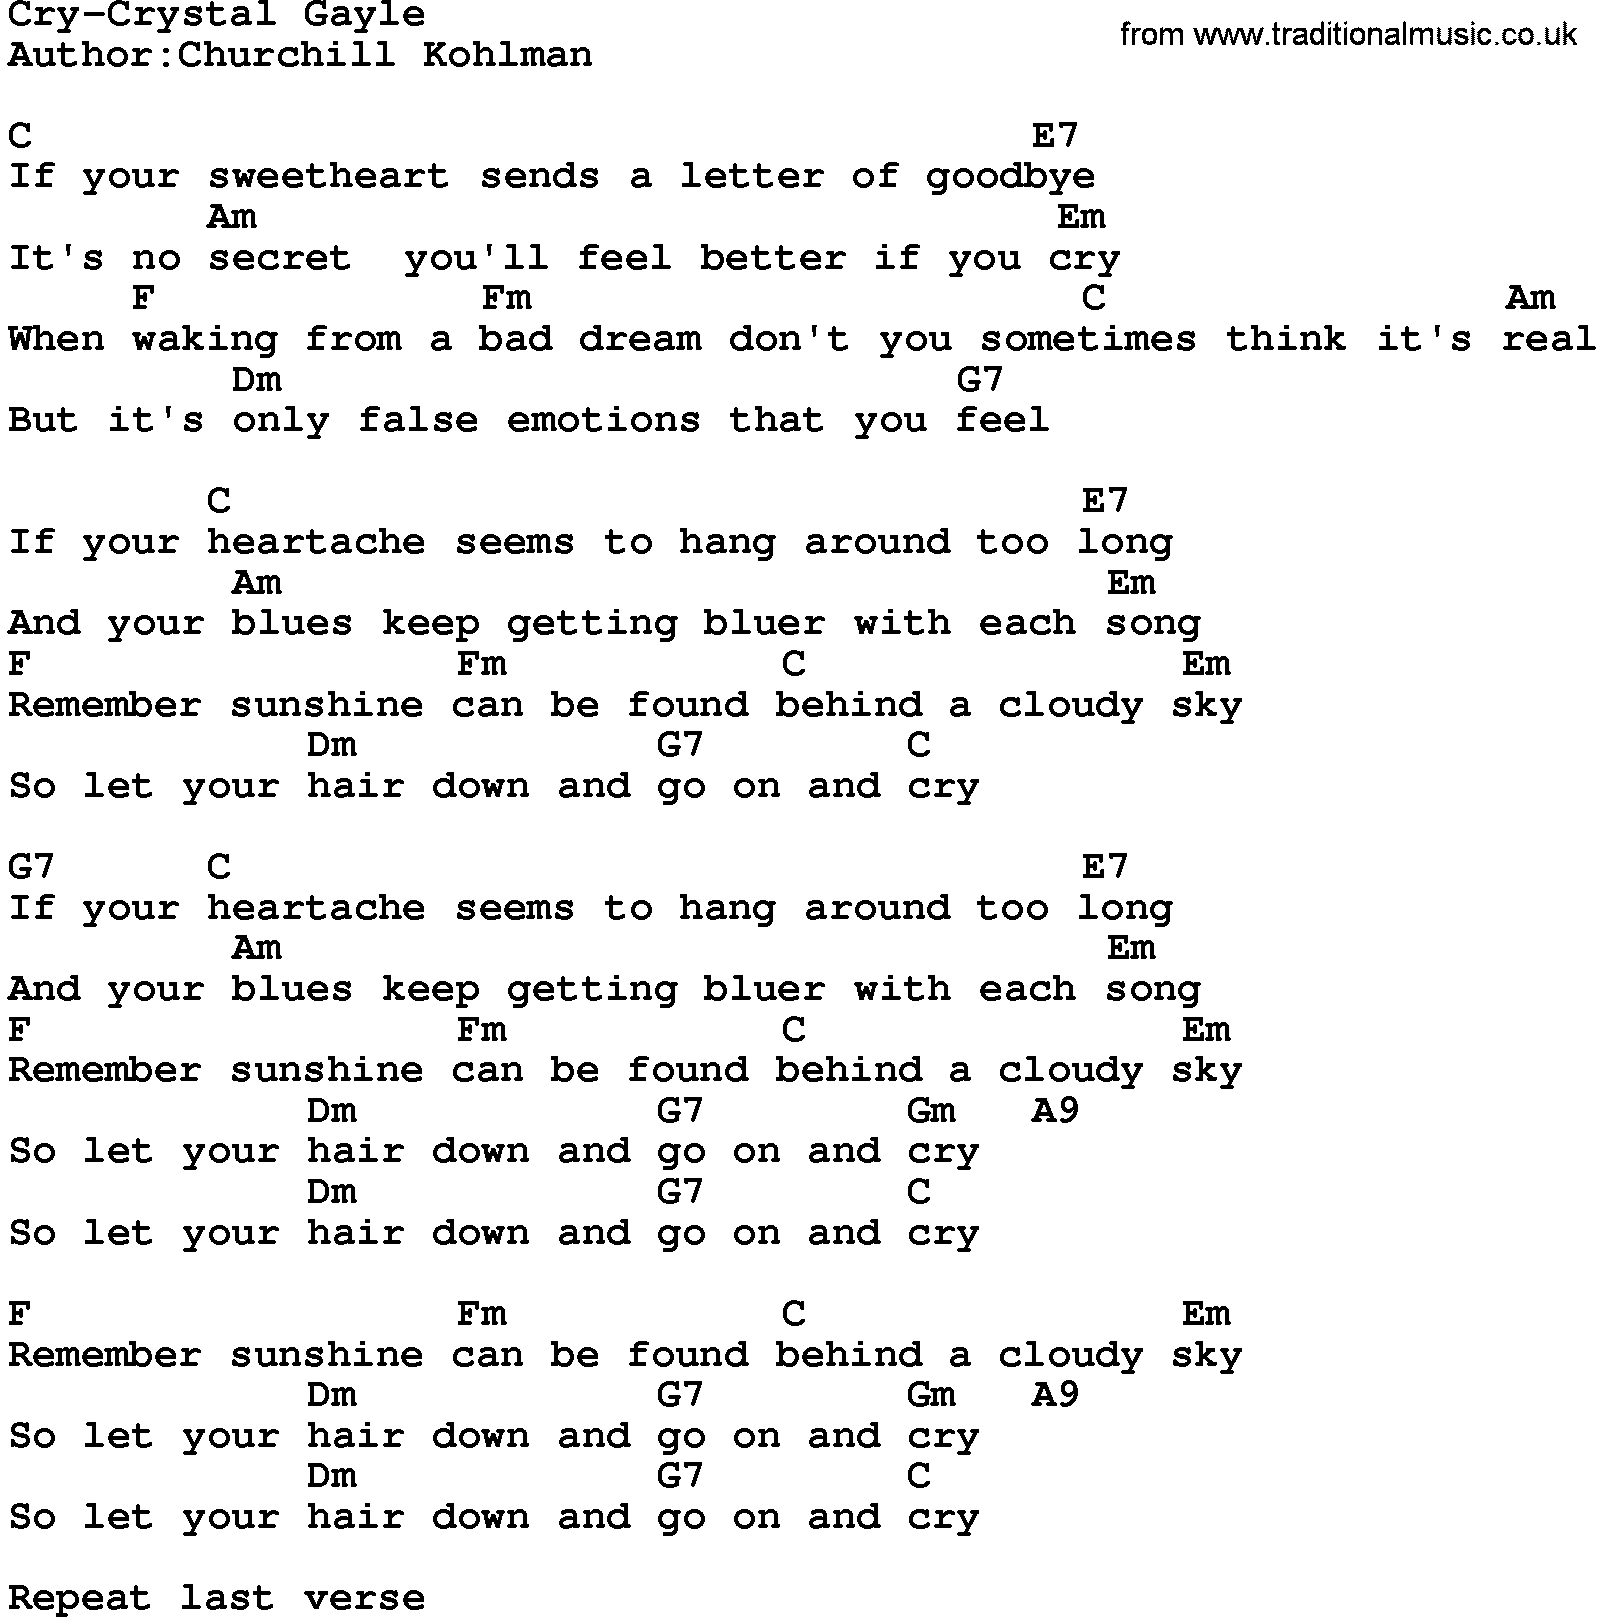 Country music song: Cry-Crystal Gayle lyrics and chords